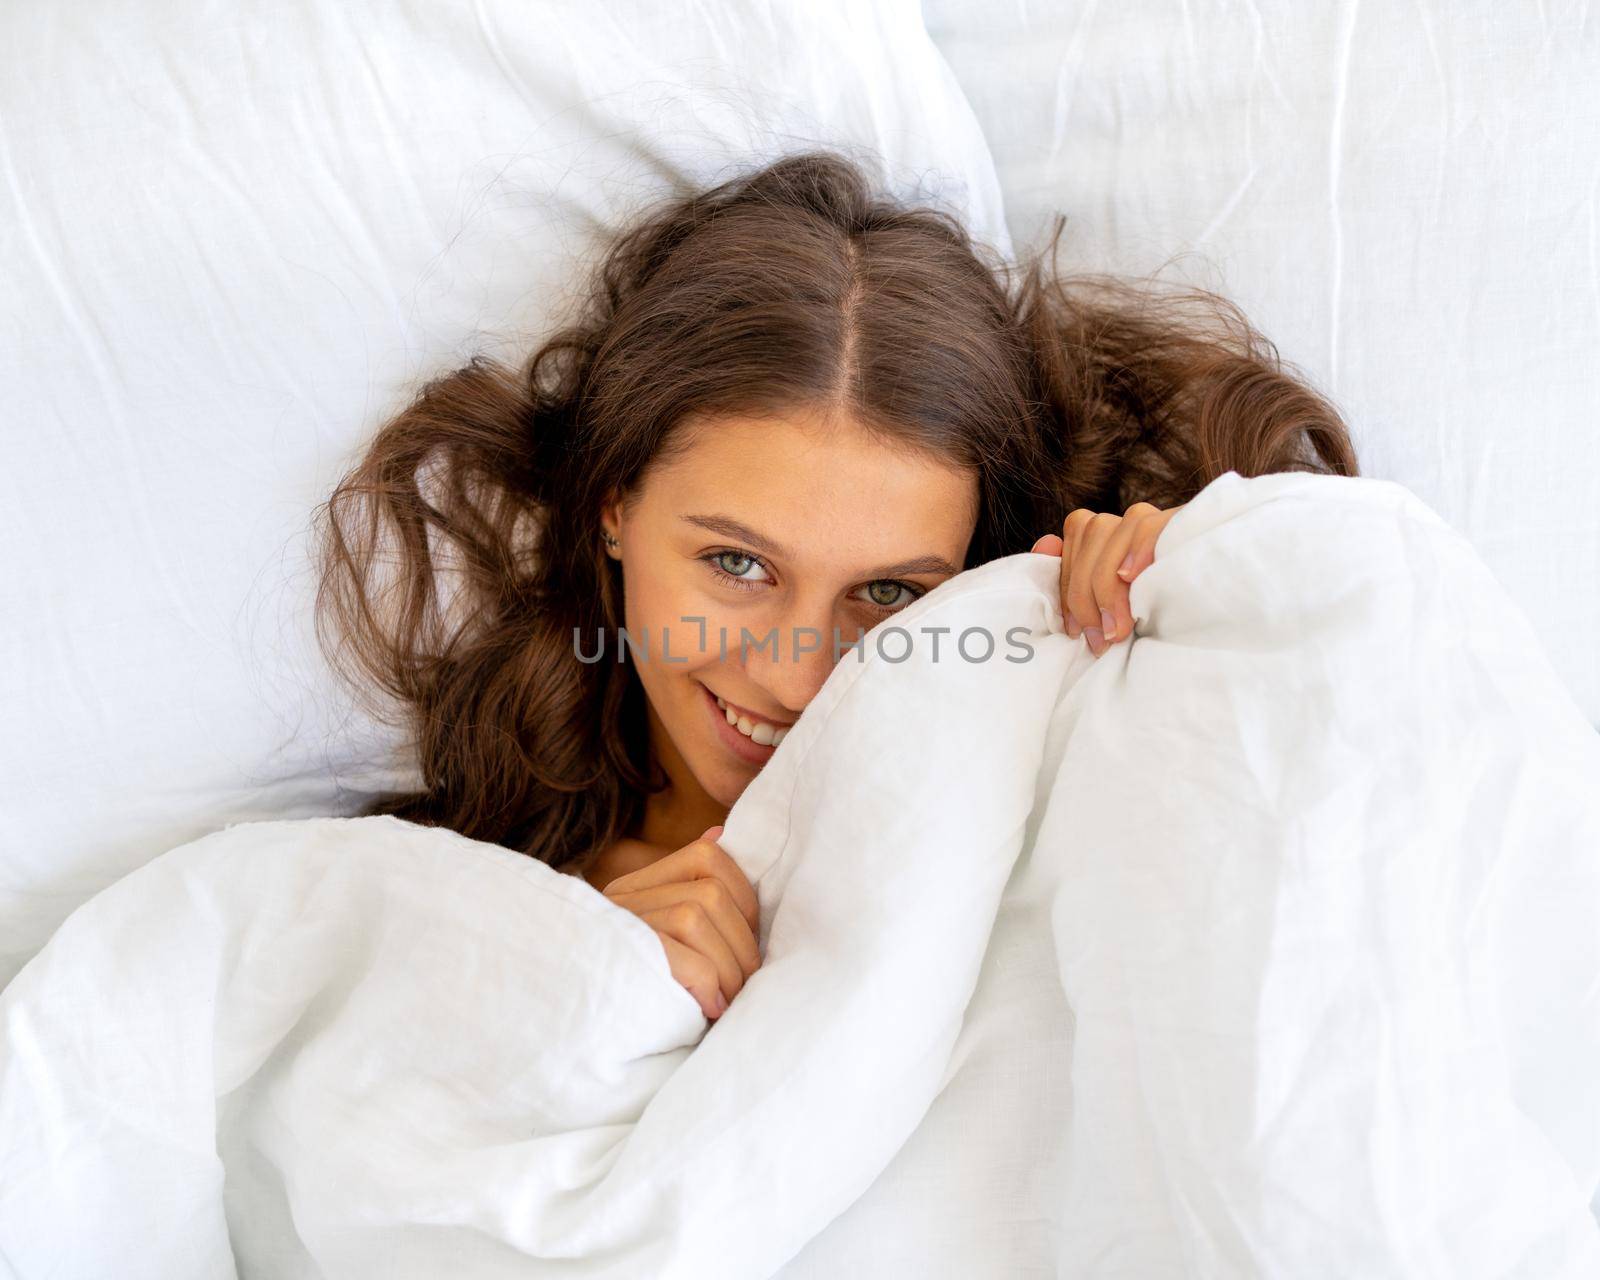 Close up portrait of beautiful smiling woman in bed. Female with long hair resting, good night sleep concept, enjoying fresh soft bedding linen and mattress in bedroom